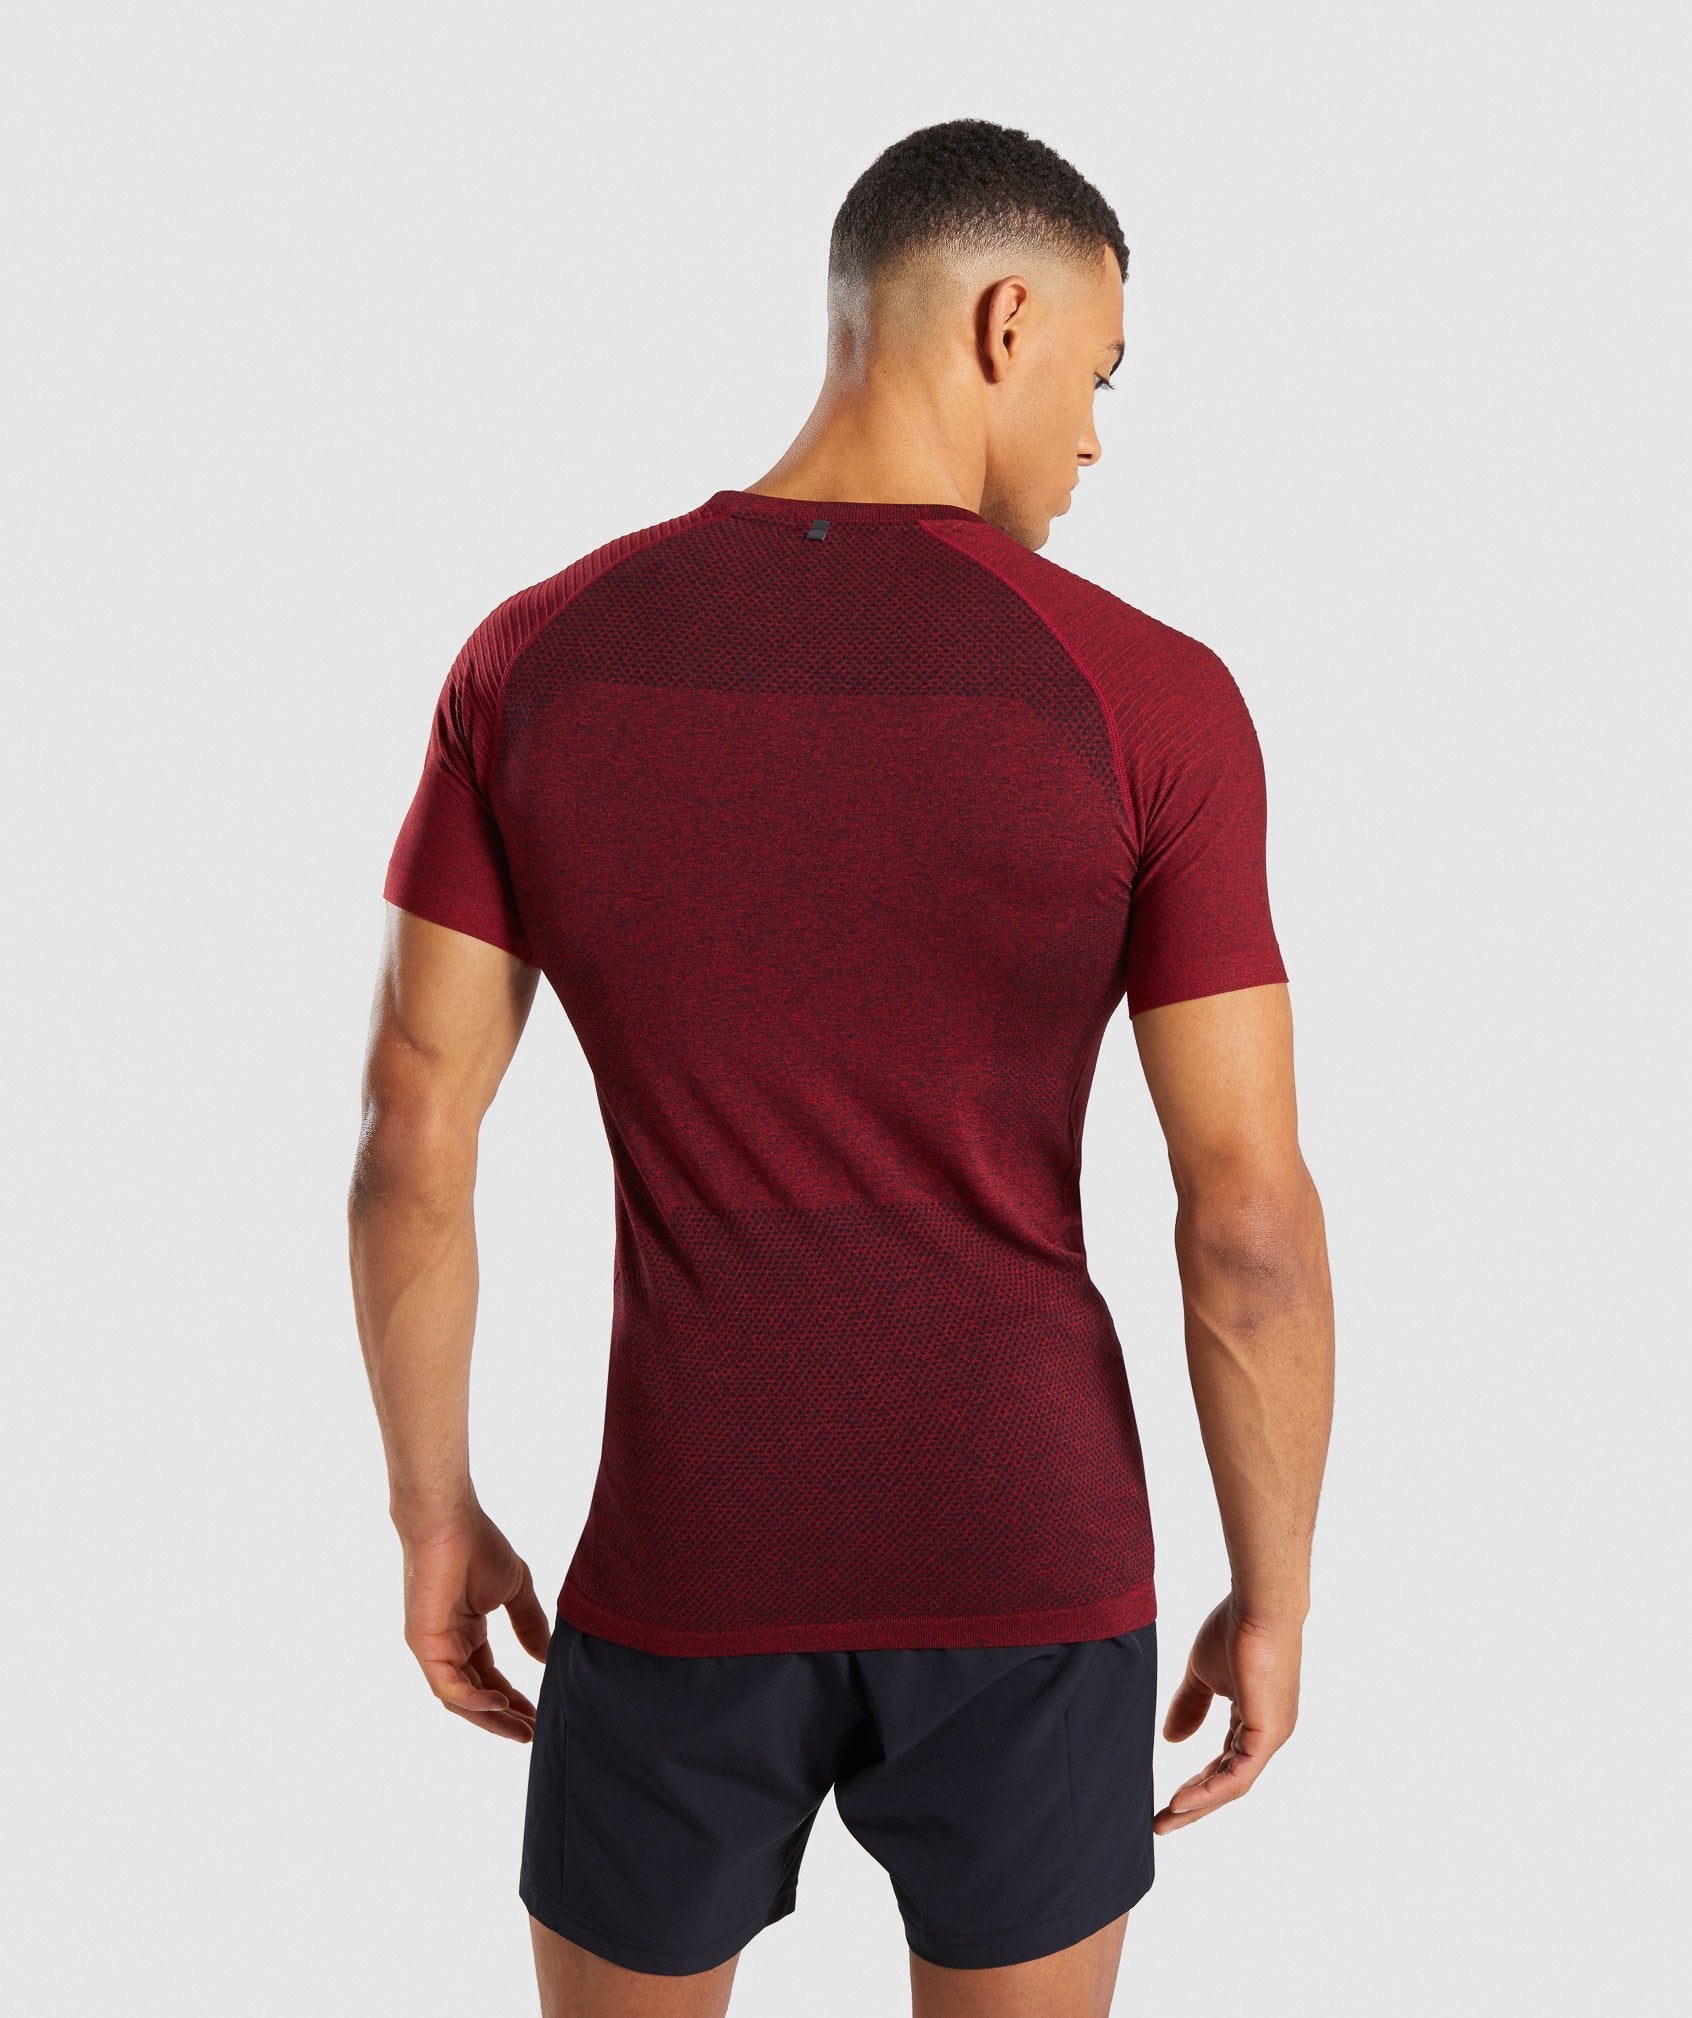 Premium Seamless T-Shirt in Red Marl - view 2